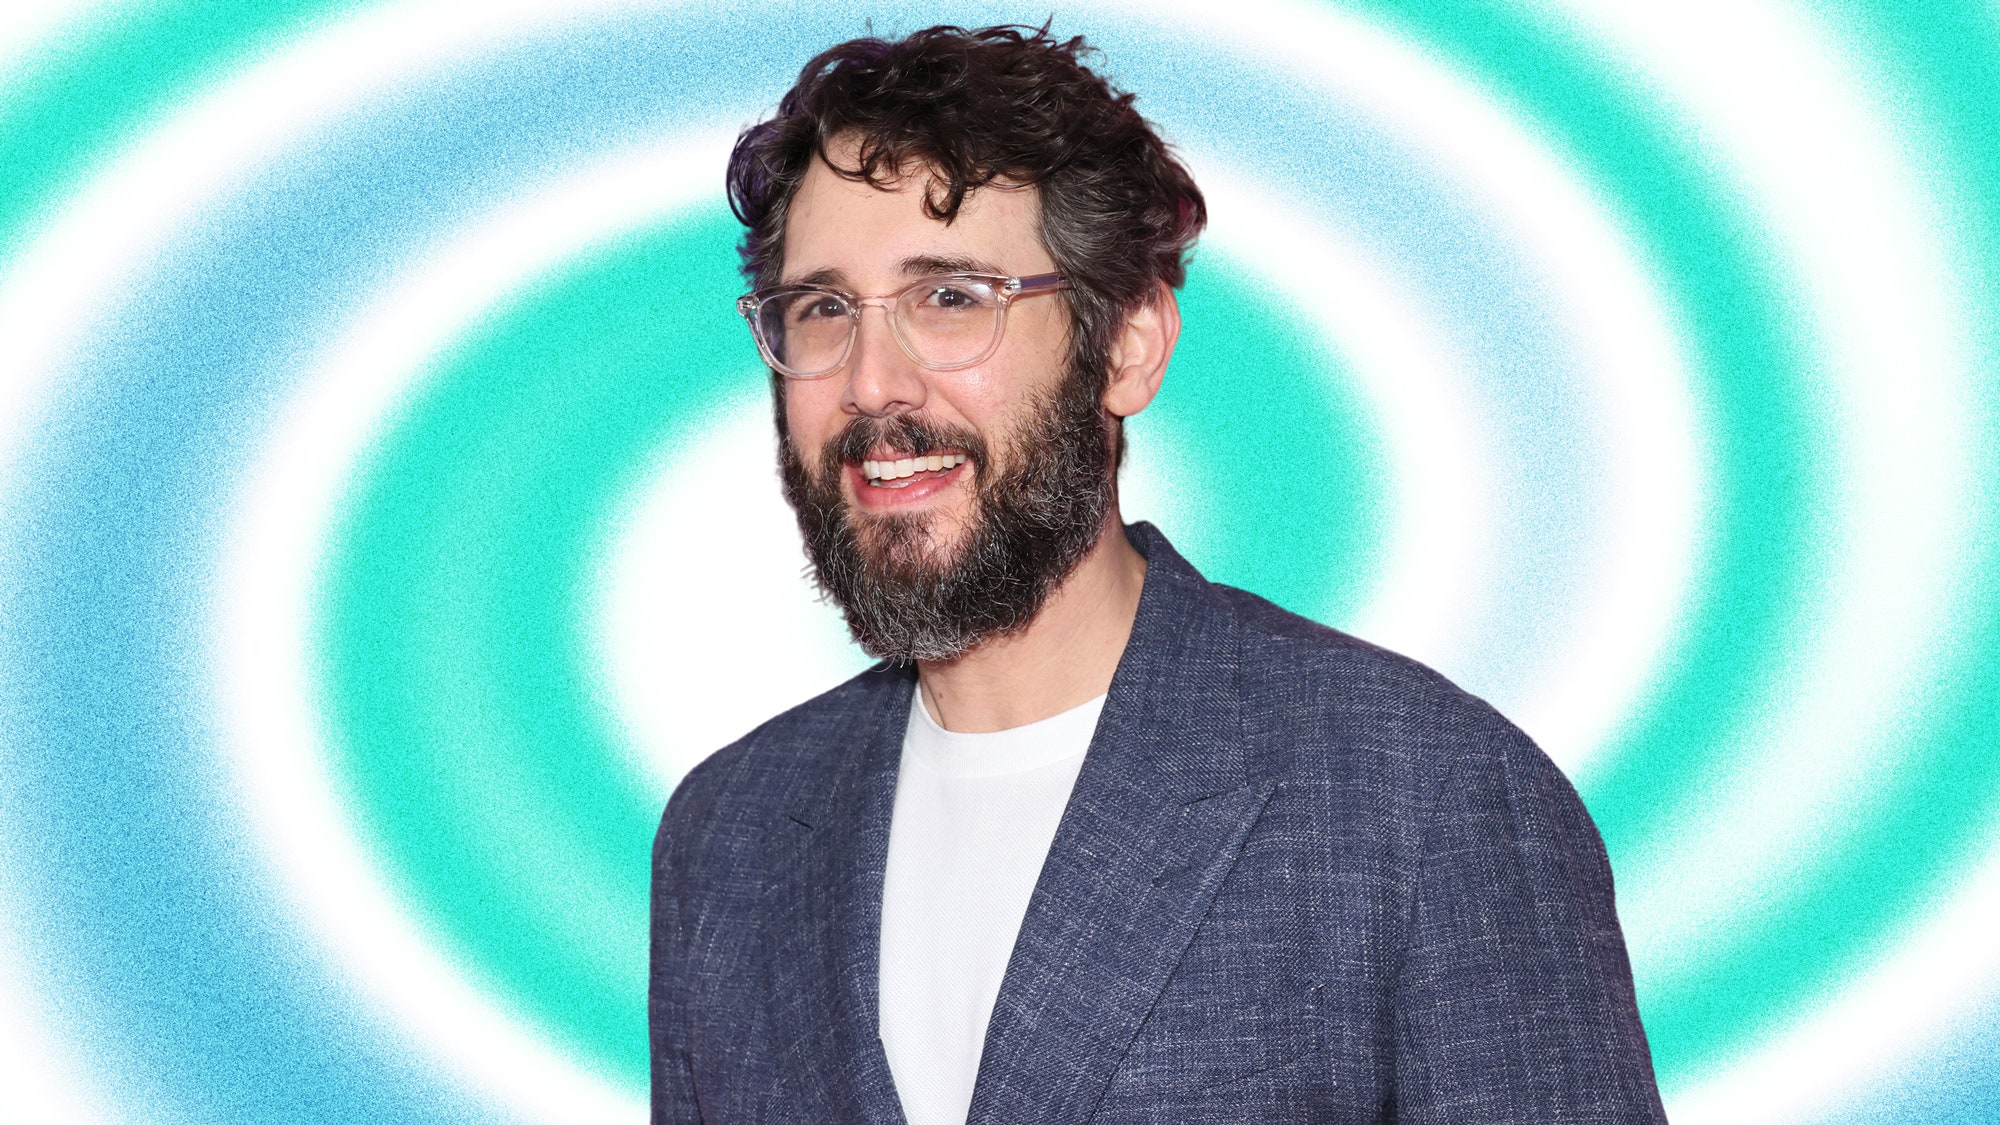 josh-groban-has-learned-how-to-eat-a-late-post-show-dinner-and-still-sleep-well